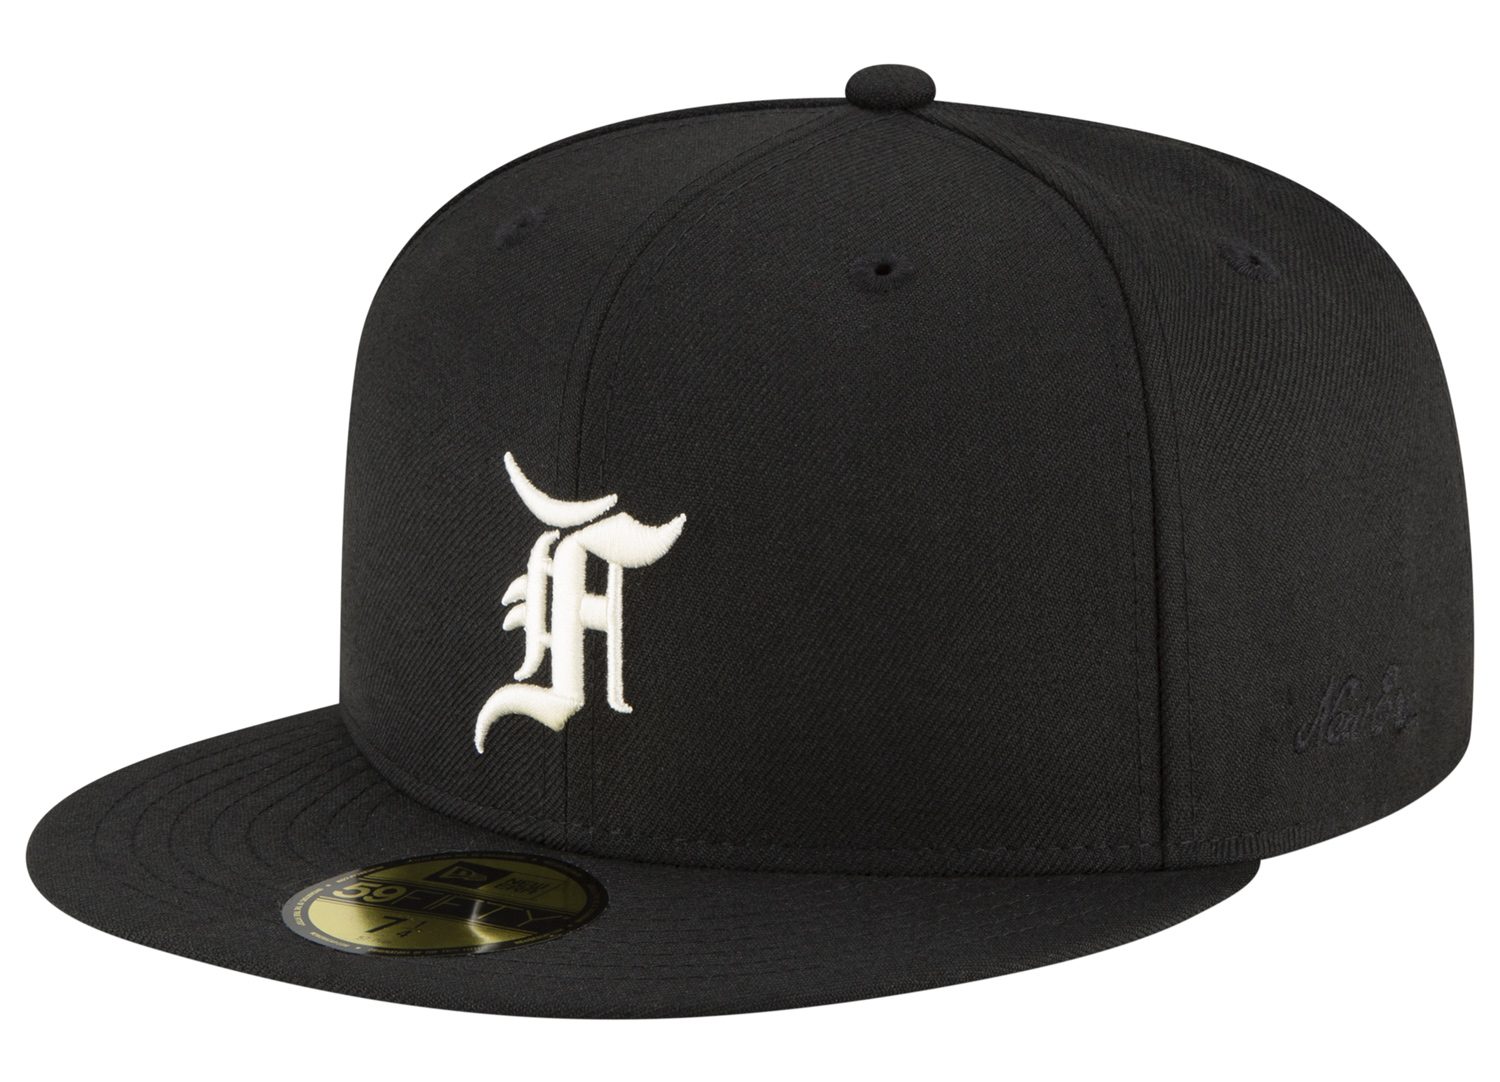 fear-of-god-new-era-black-59fifty-fitted-cap